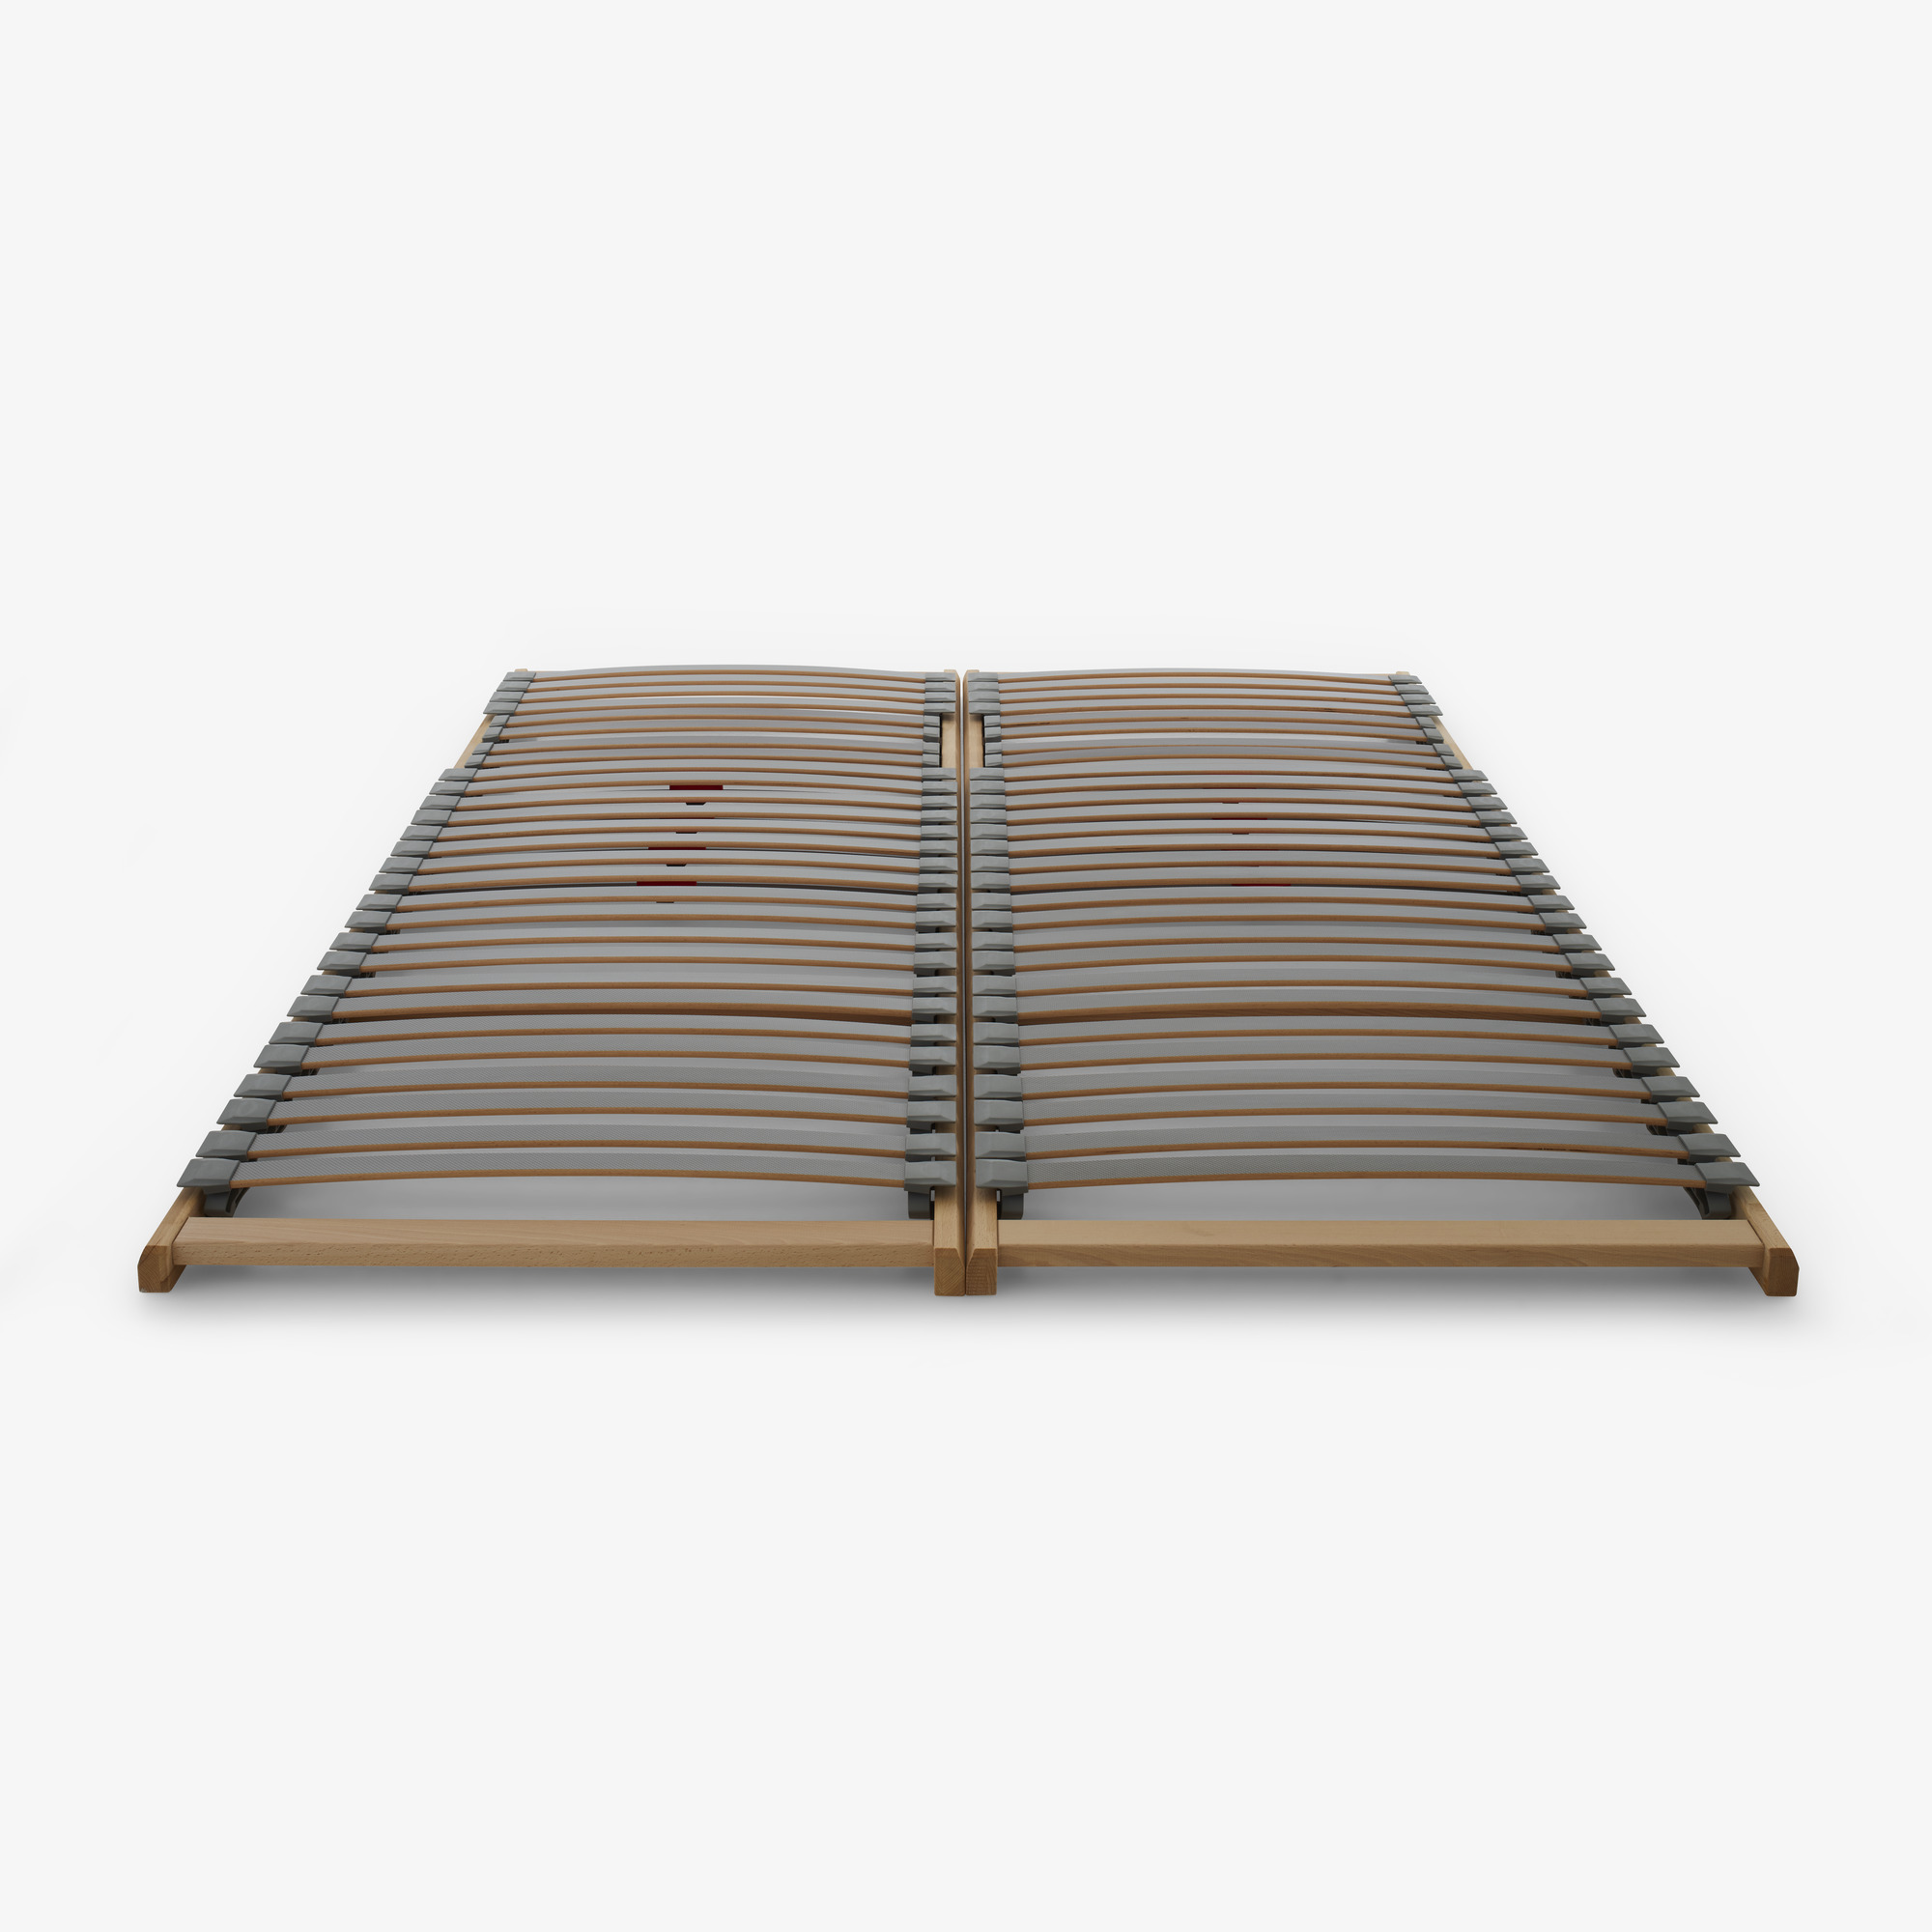 Image Slatted base - with double slats with articulated supports 1